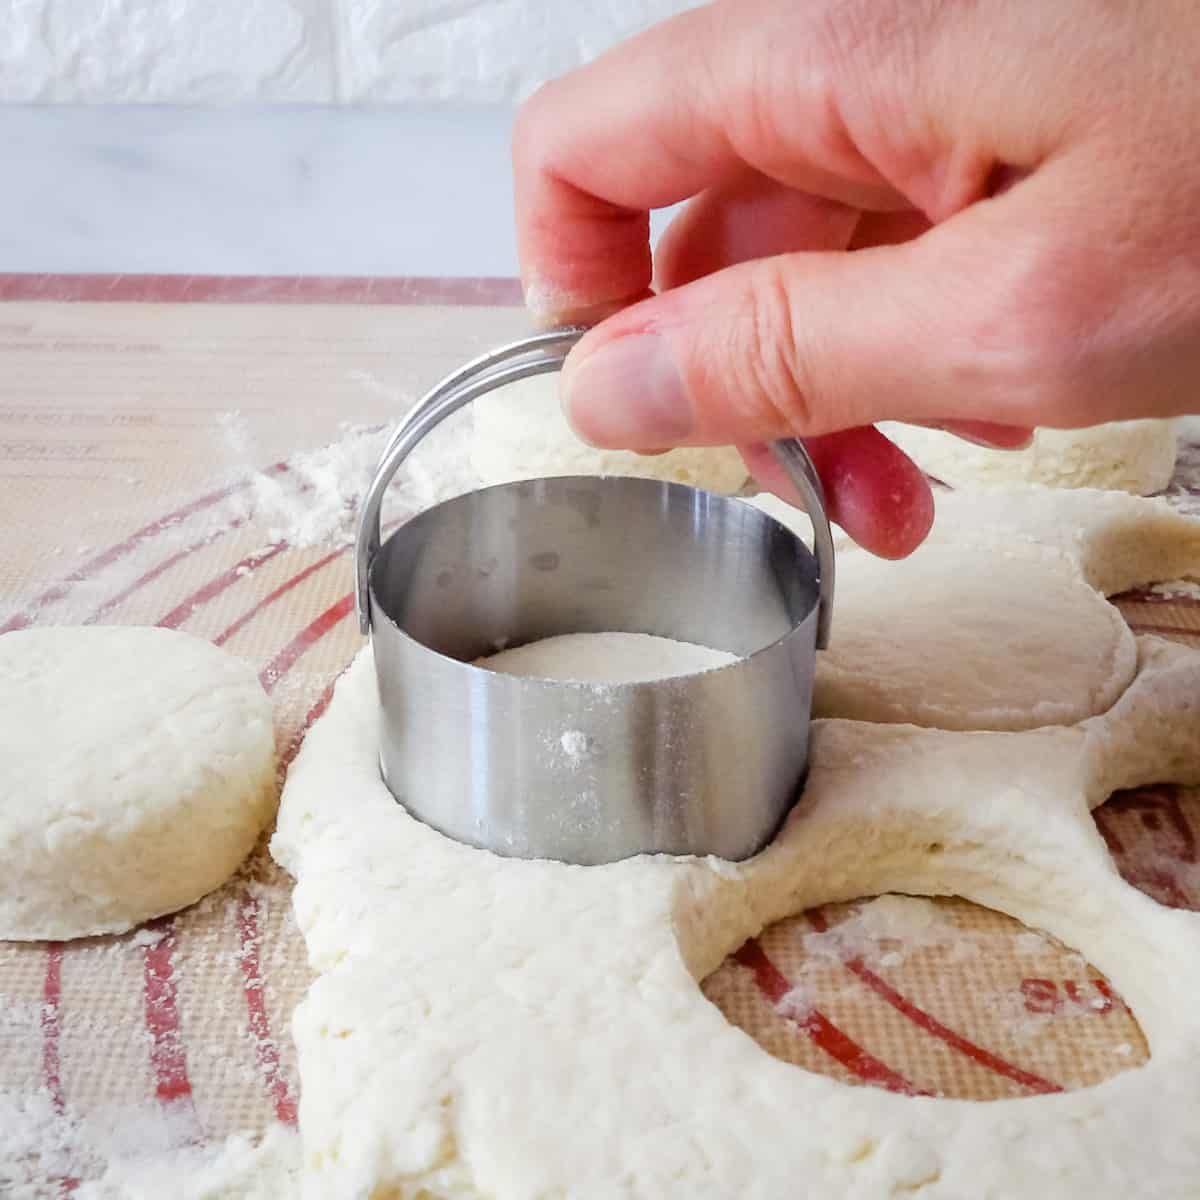 Biscuits being cut out of the dough with a metal biscuit cutter.